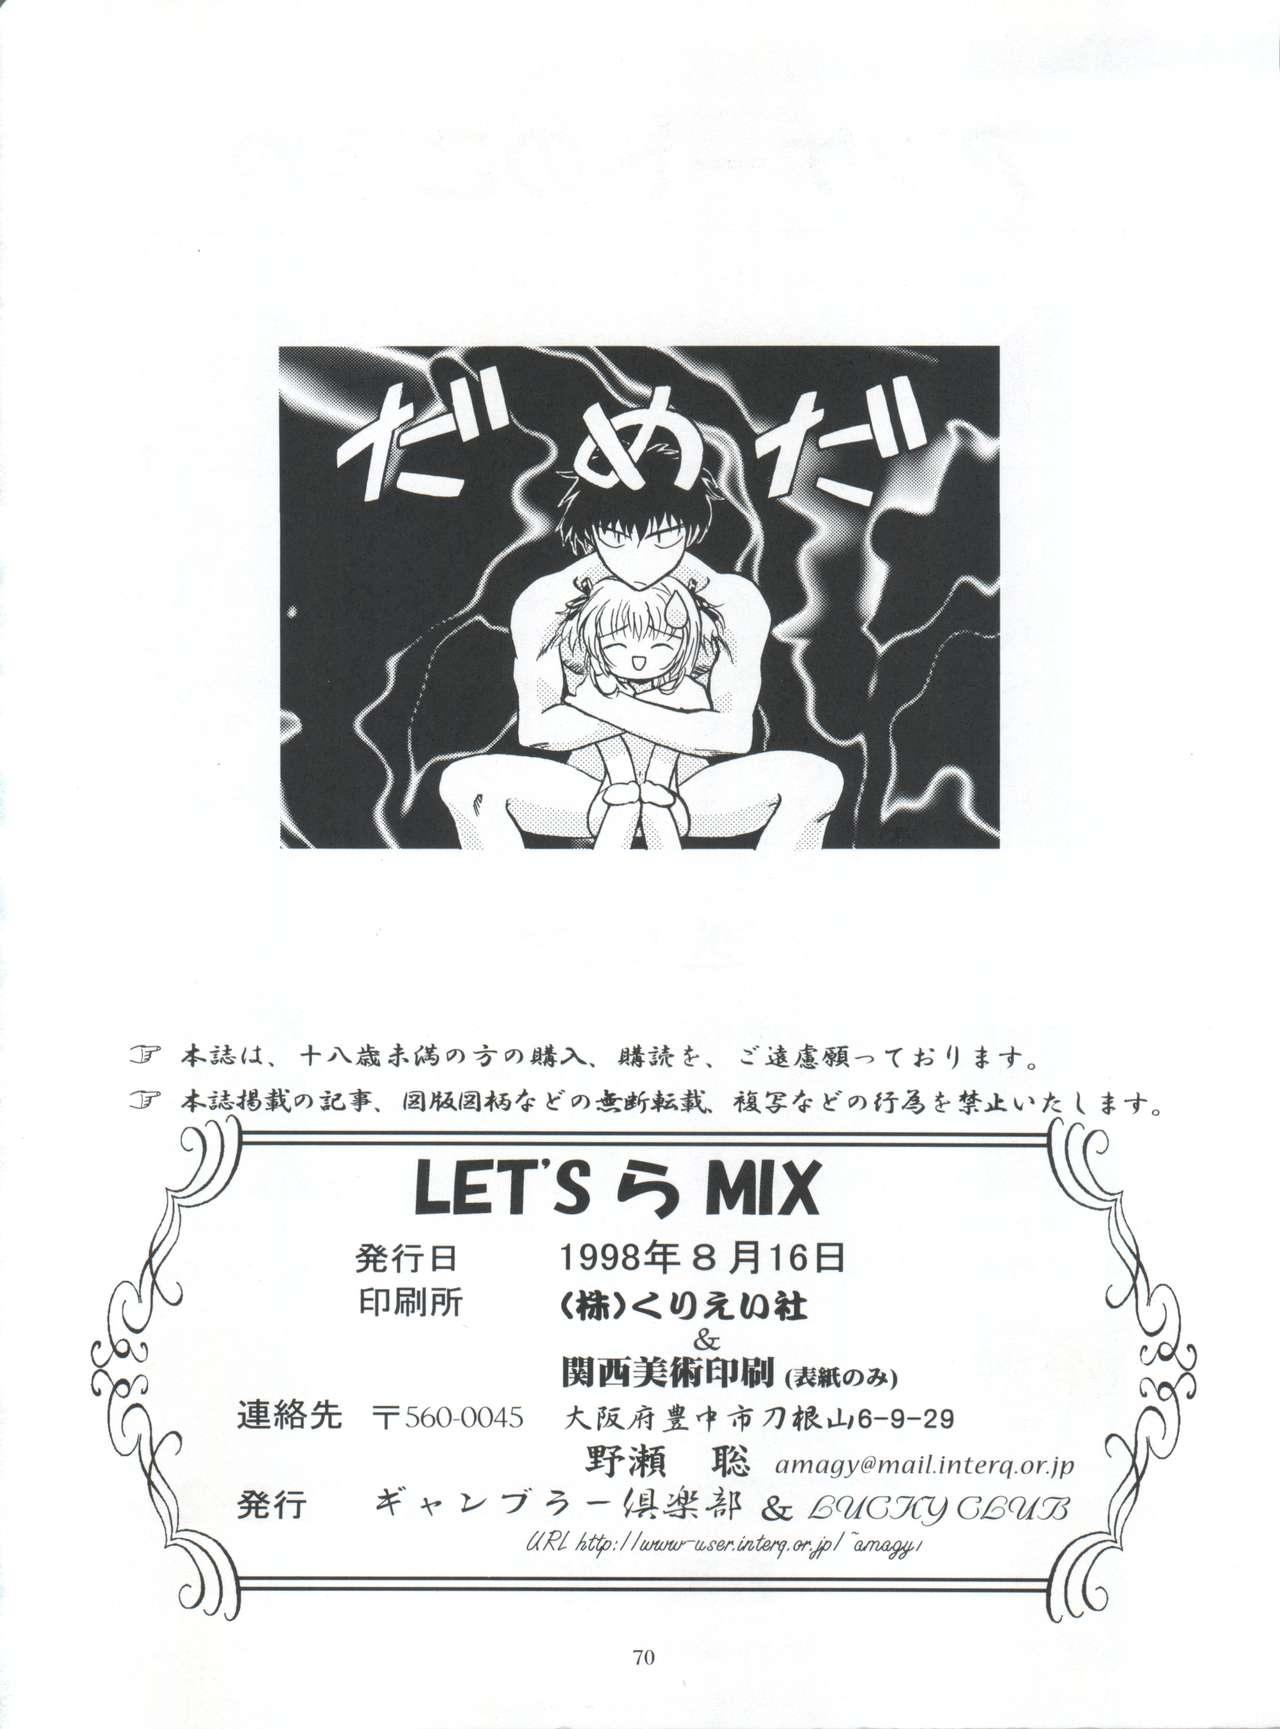 LET'S Ra MIX 79